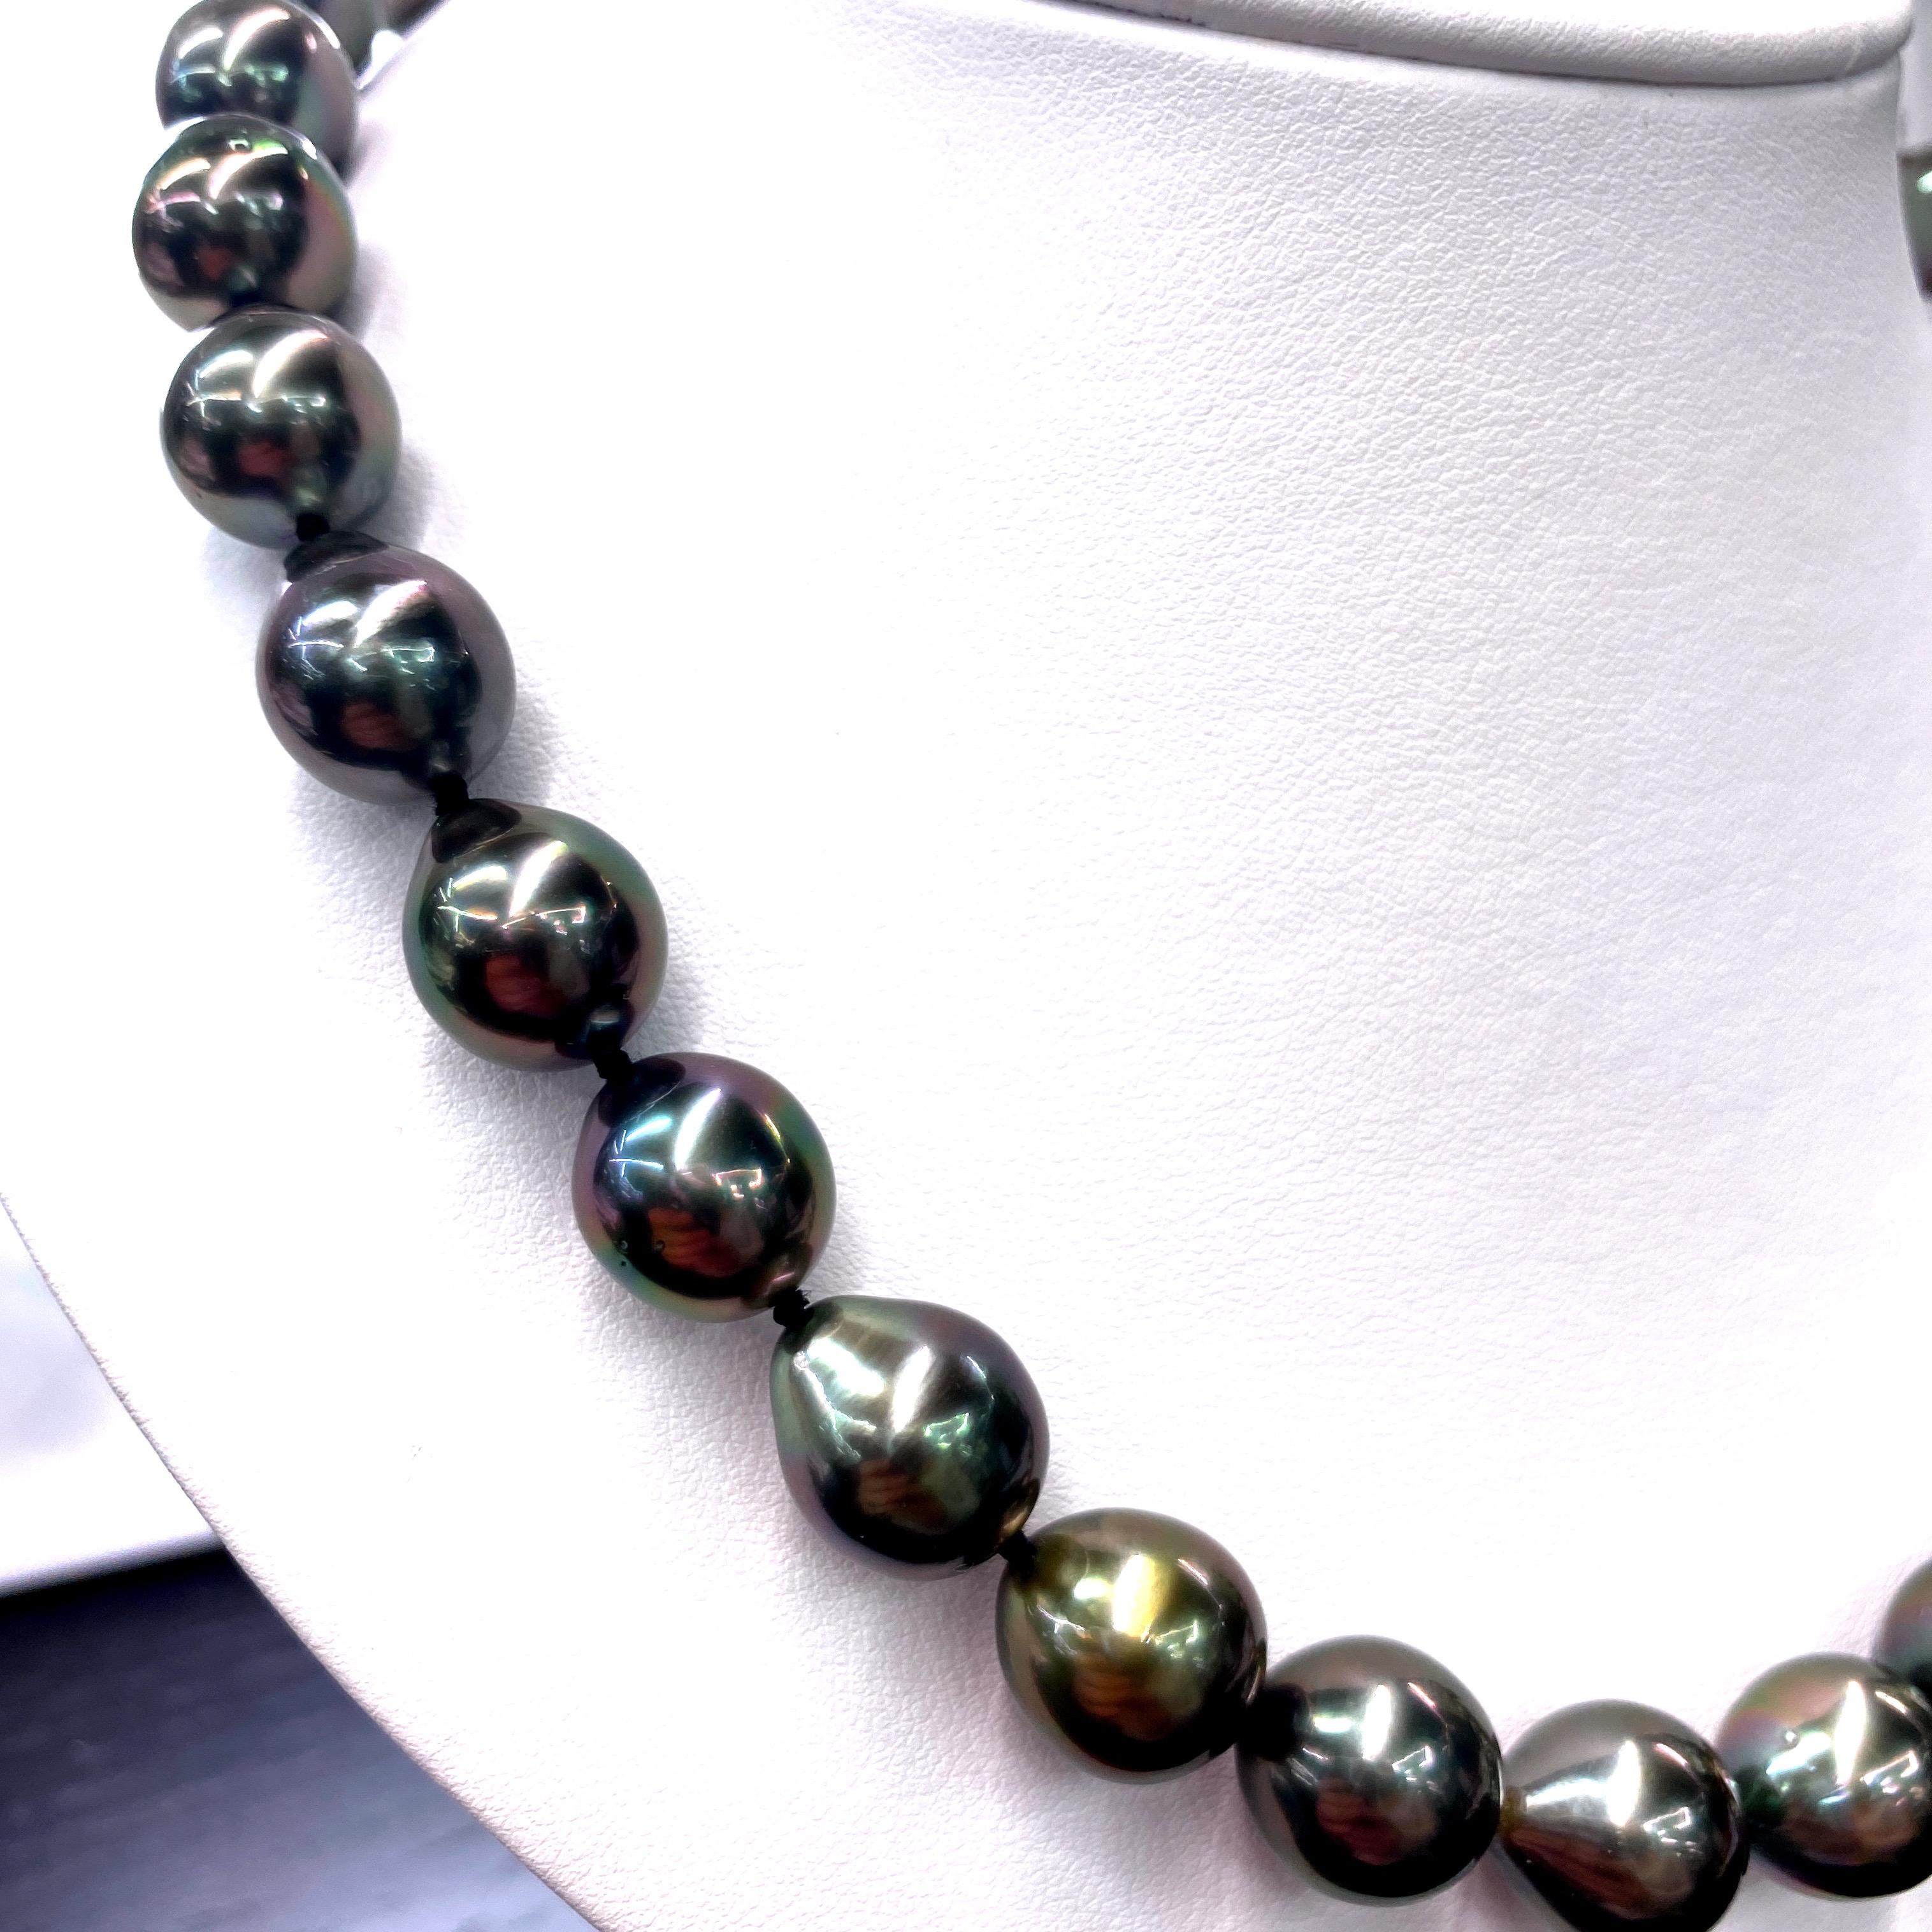 Perfectly matched pearl strand necklace featuring 31 Tahitian pearls measuring 10.1-12 mm with a high polish ball clasp in 14K White Gold. 

Pearl quality: AAA
Pearl Luster: AAA Excellent
Nacre : Very Thick

Strand can be made to order, shortened or